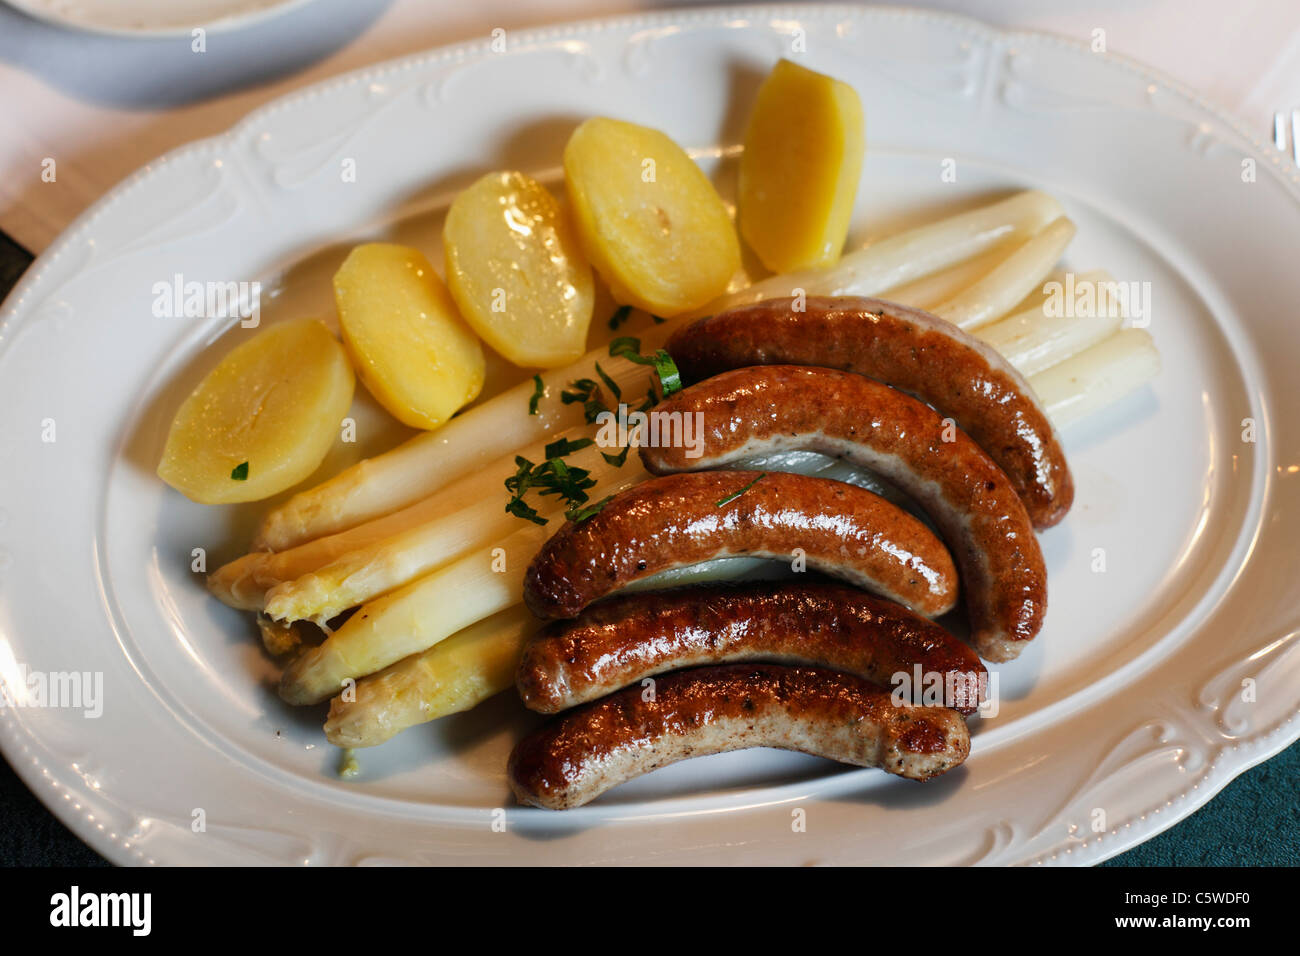 Germany, Bavaria, Franconia, Close up of fried sausages and asparagus Stock Photo